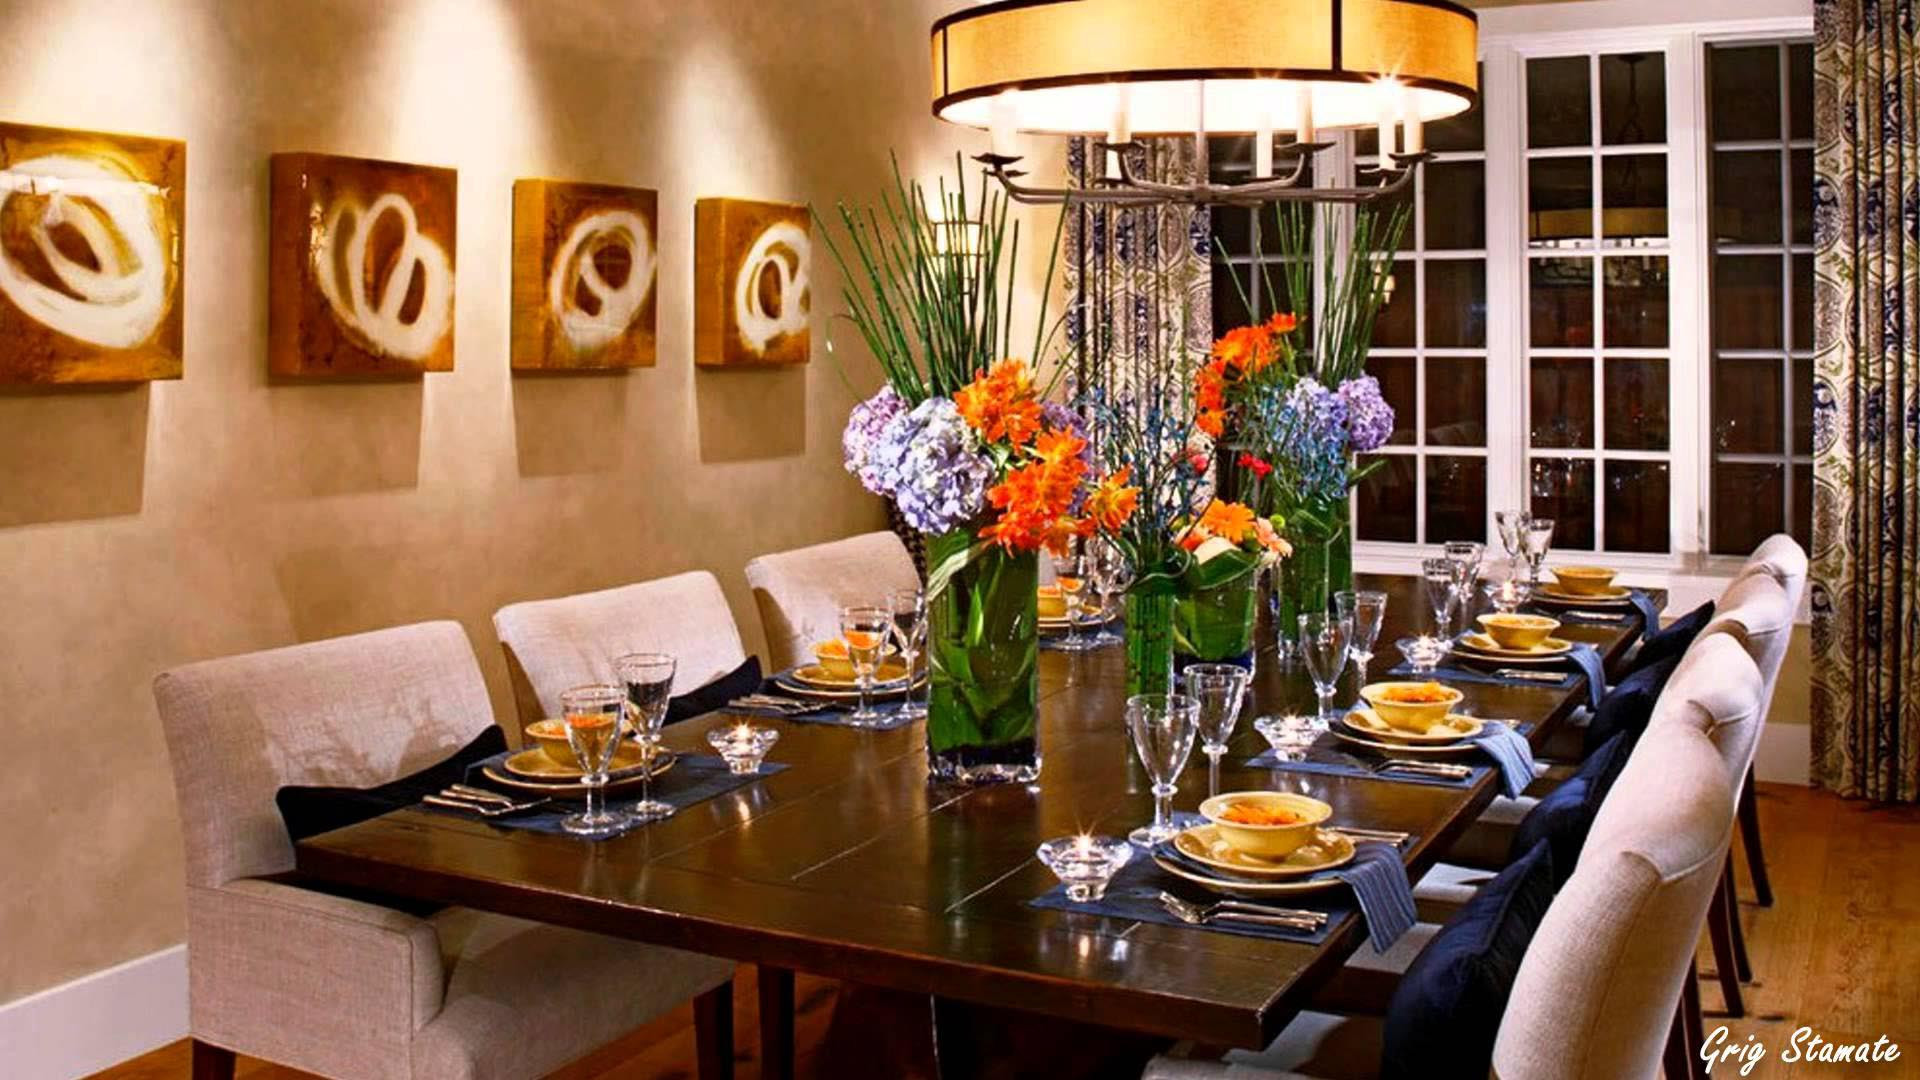 Ideas For A Dinner Party At Home
 Dinner Party Themes Make ficial Meeting Impressive